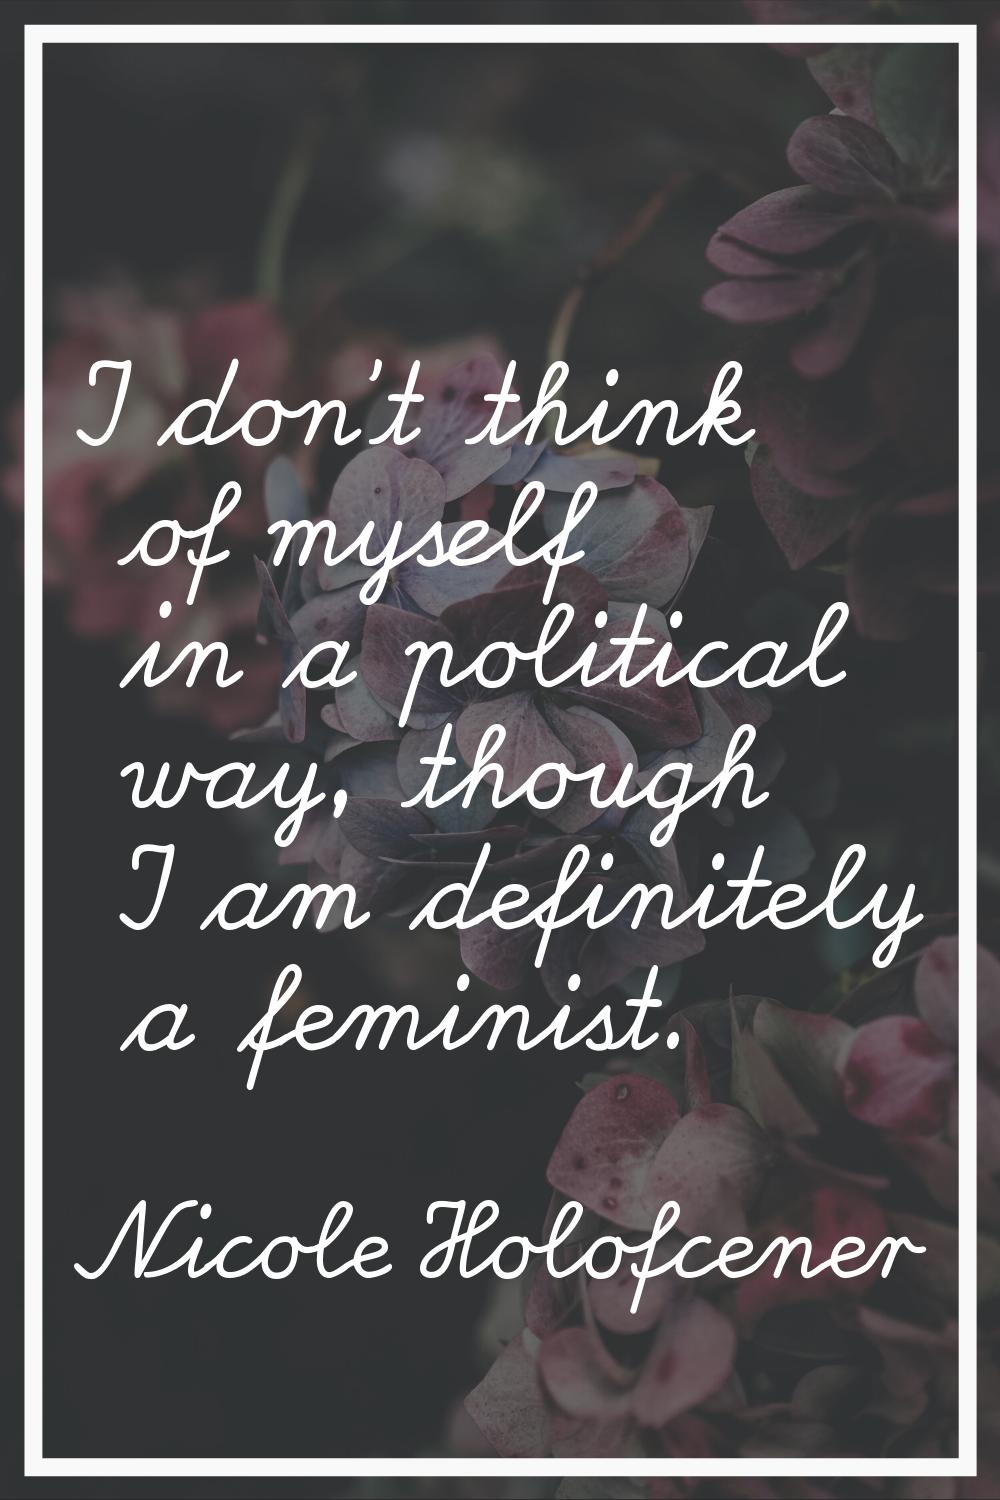 I don't think of myself in a political way, though I am definitely a feminist.